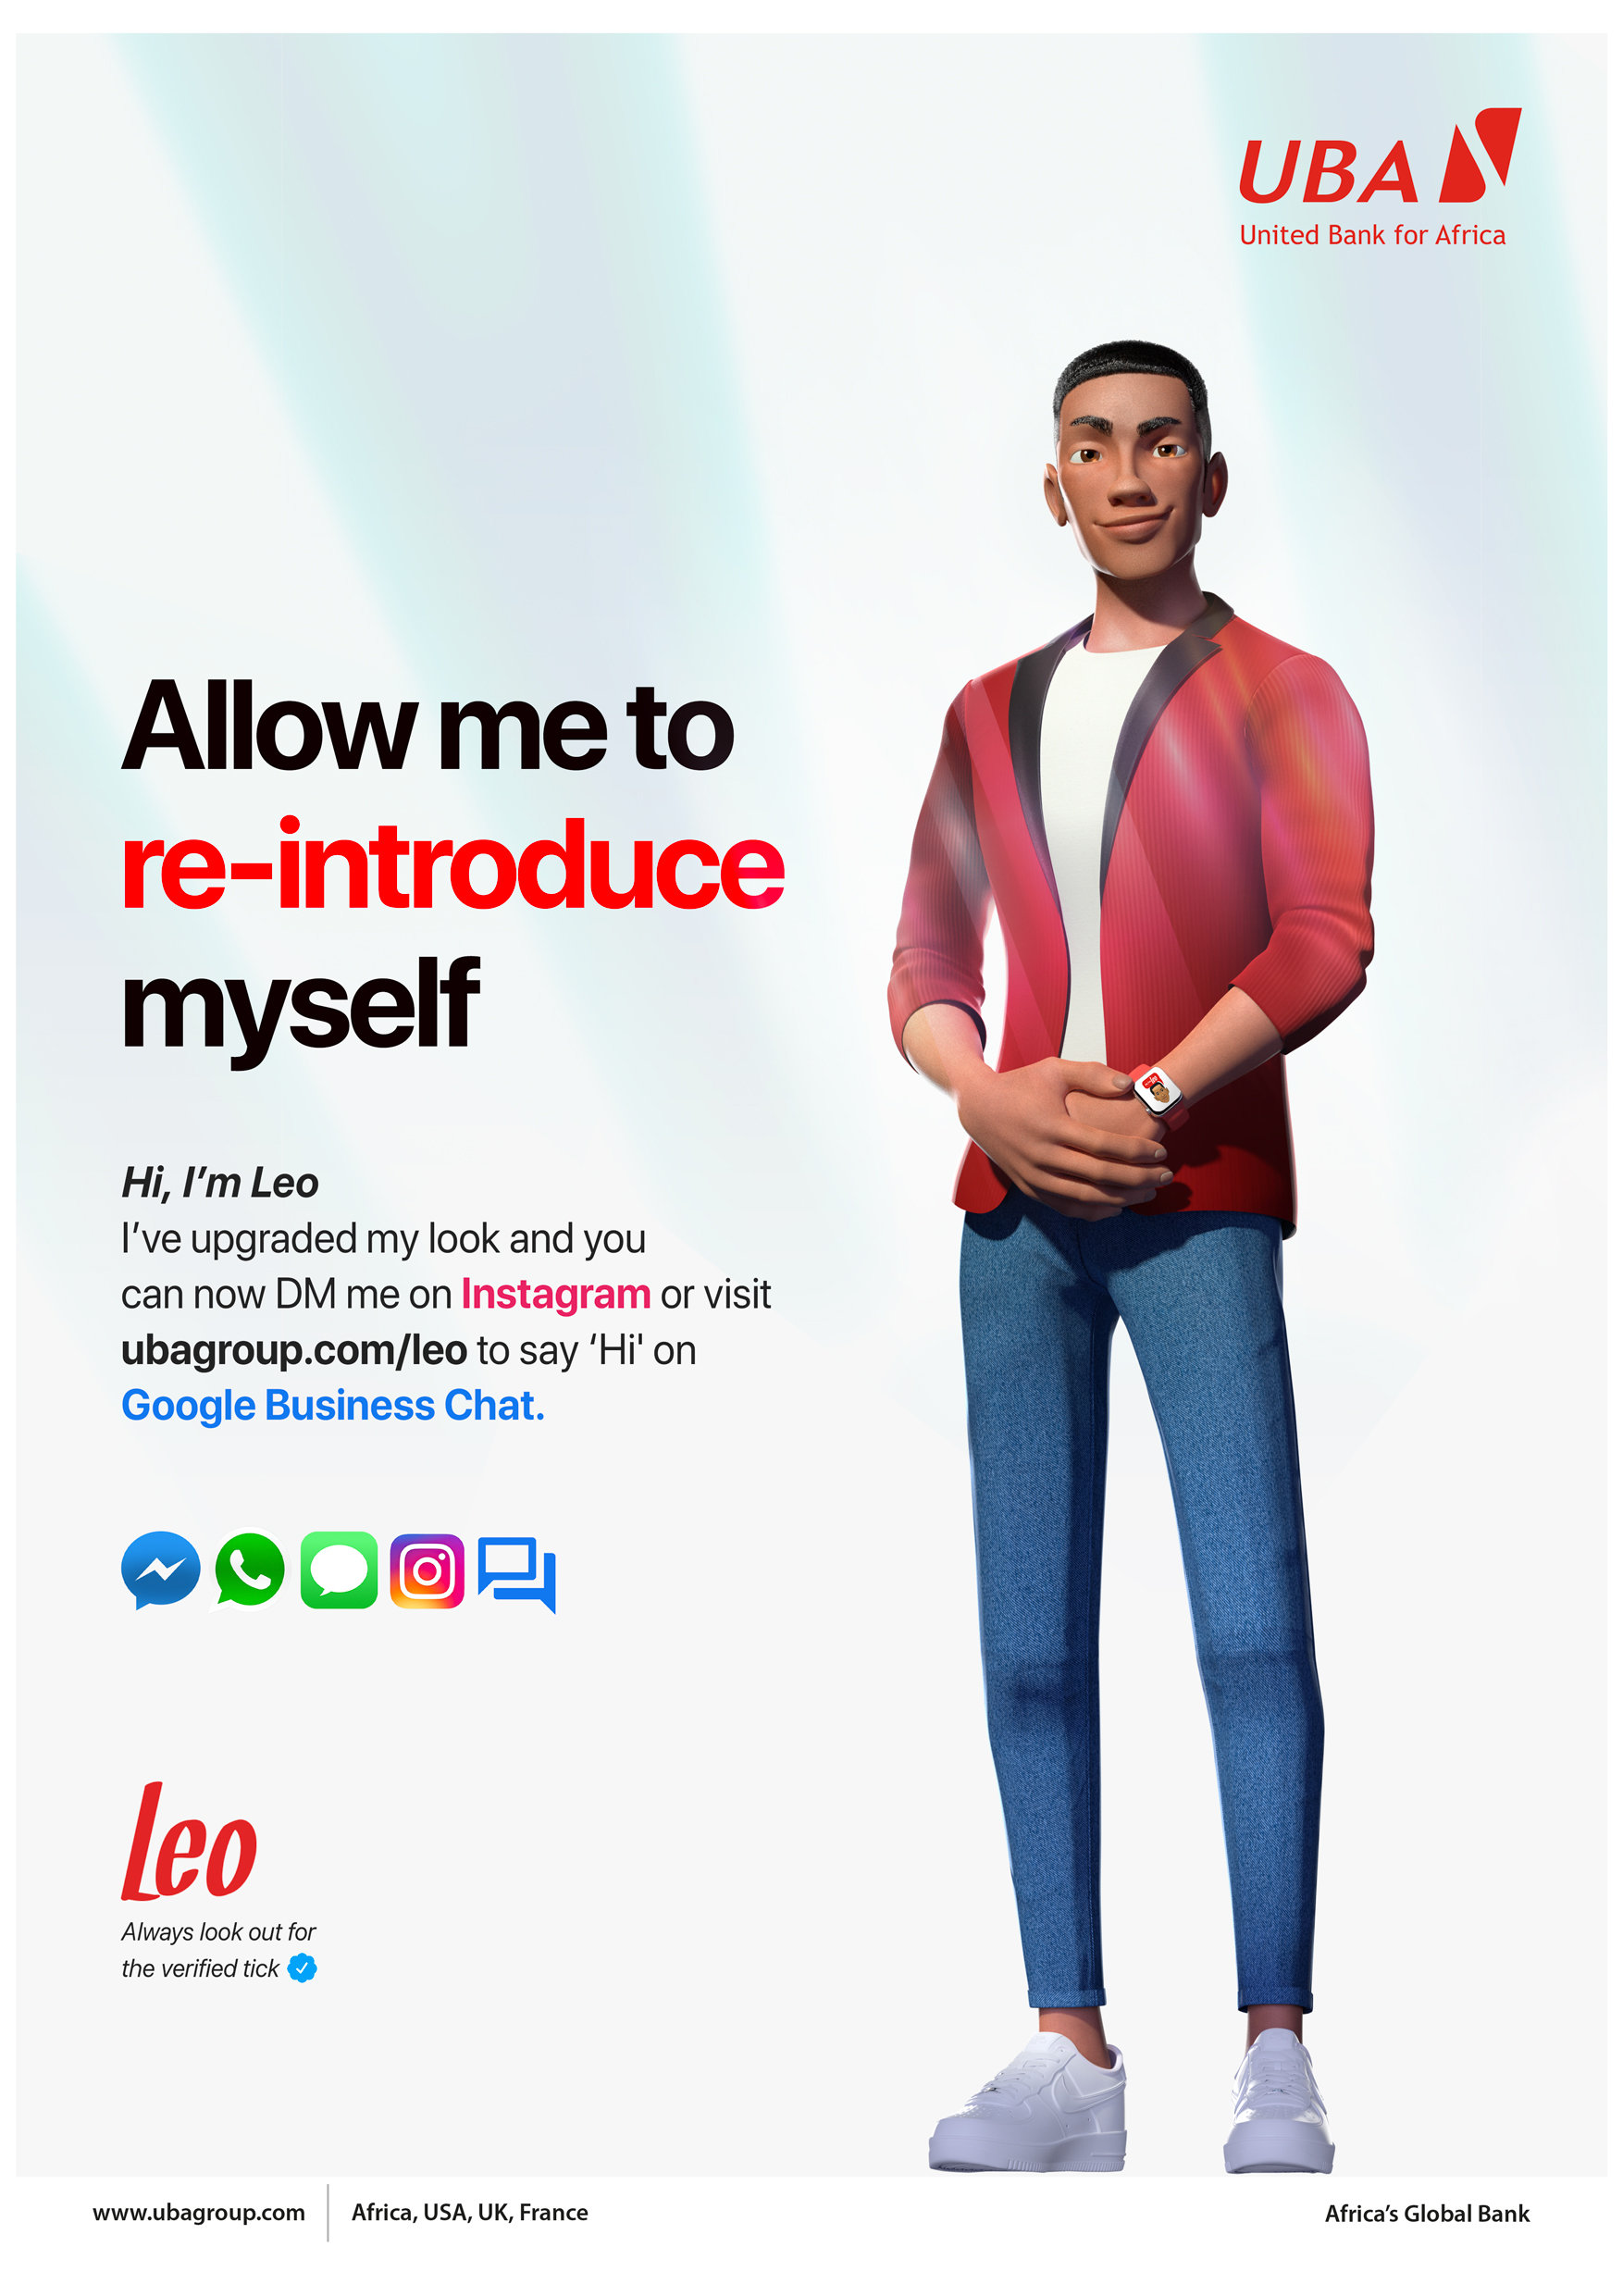 UBA Extends Leo Service to Google Business Chat and Instagram